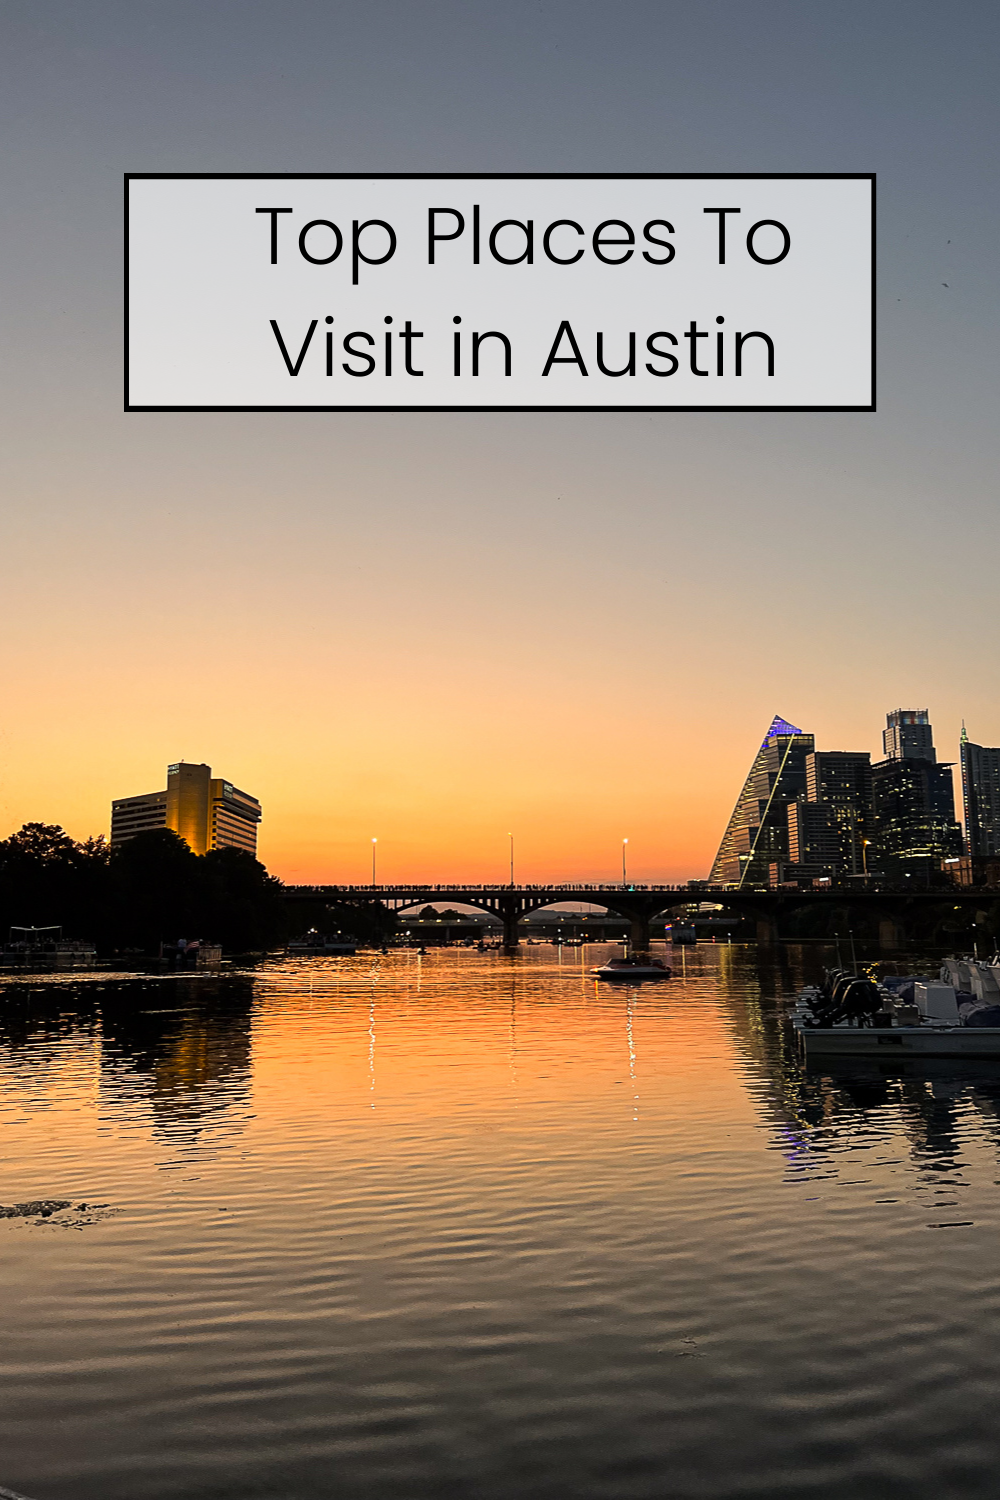 Top Places to visit in austin